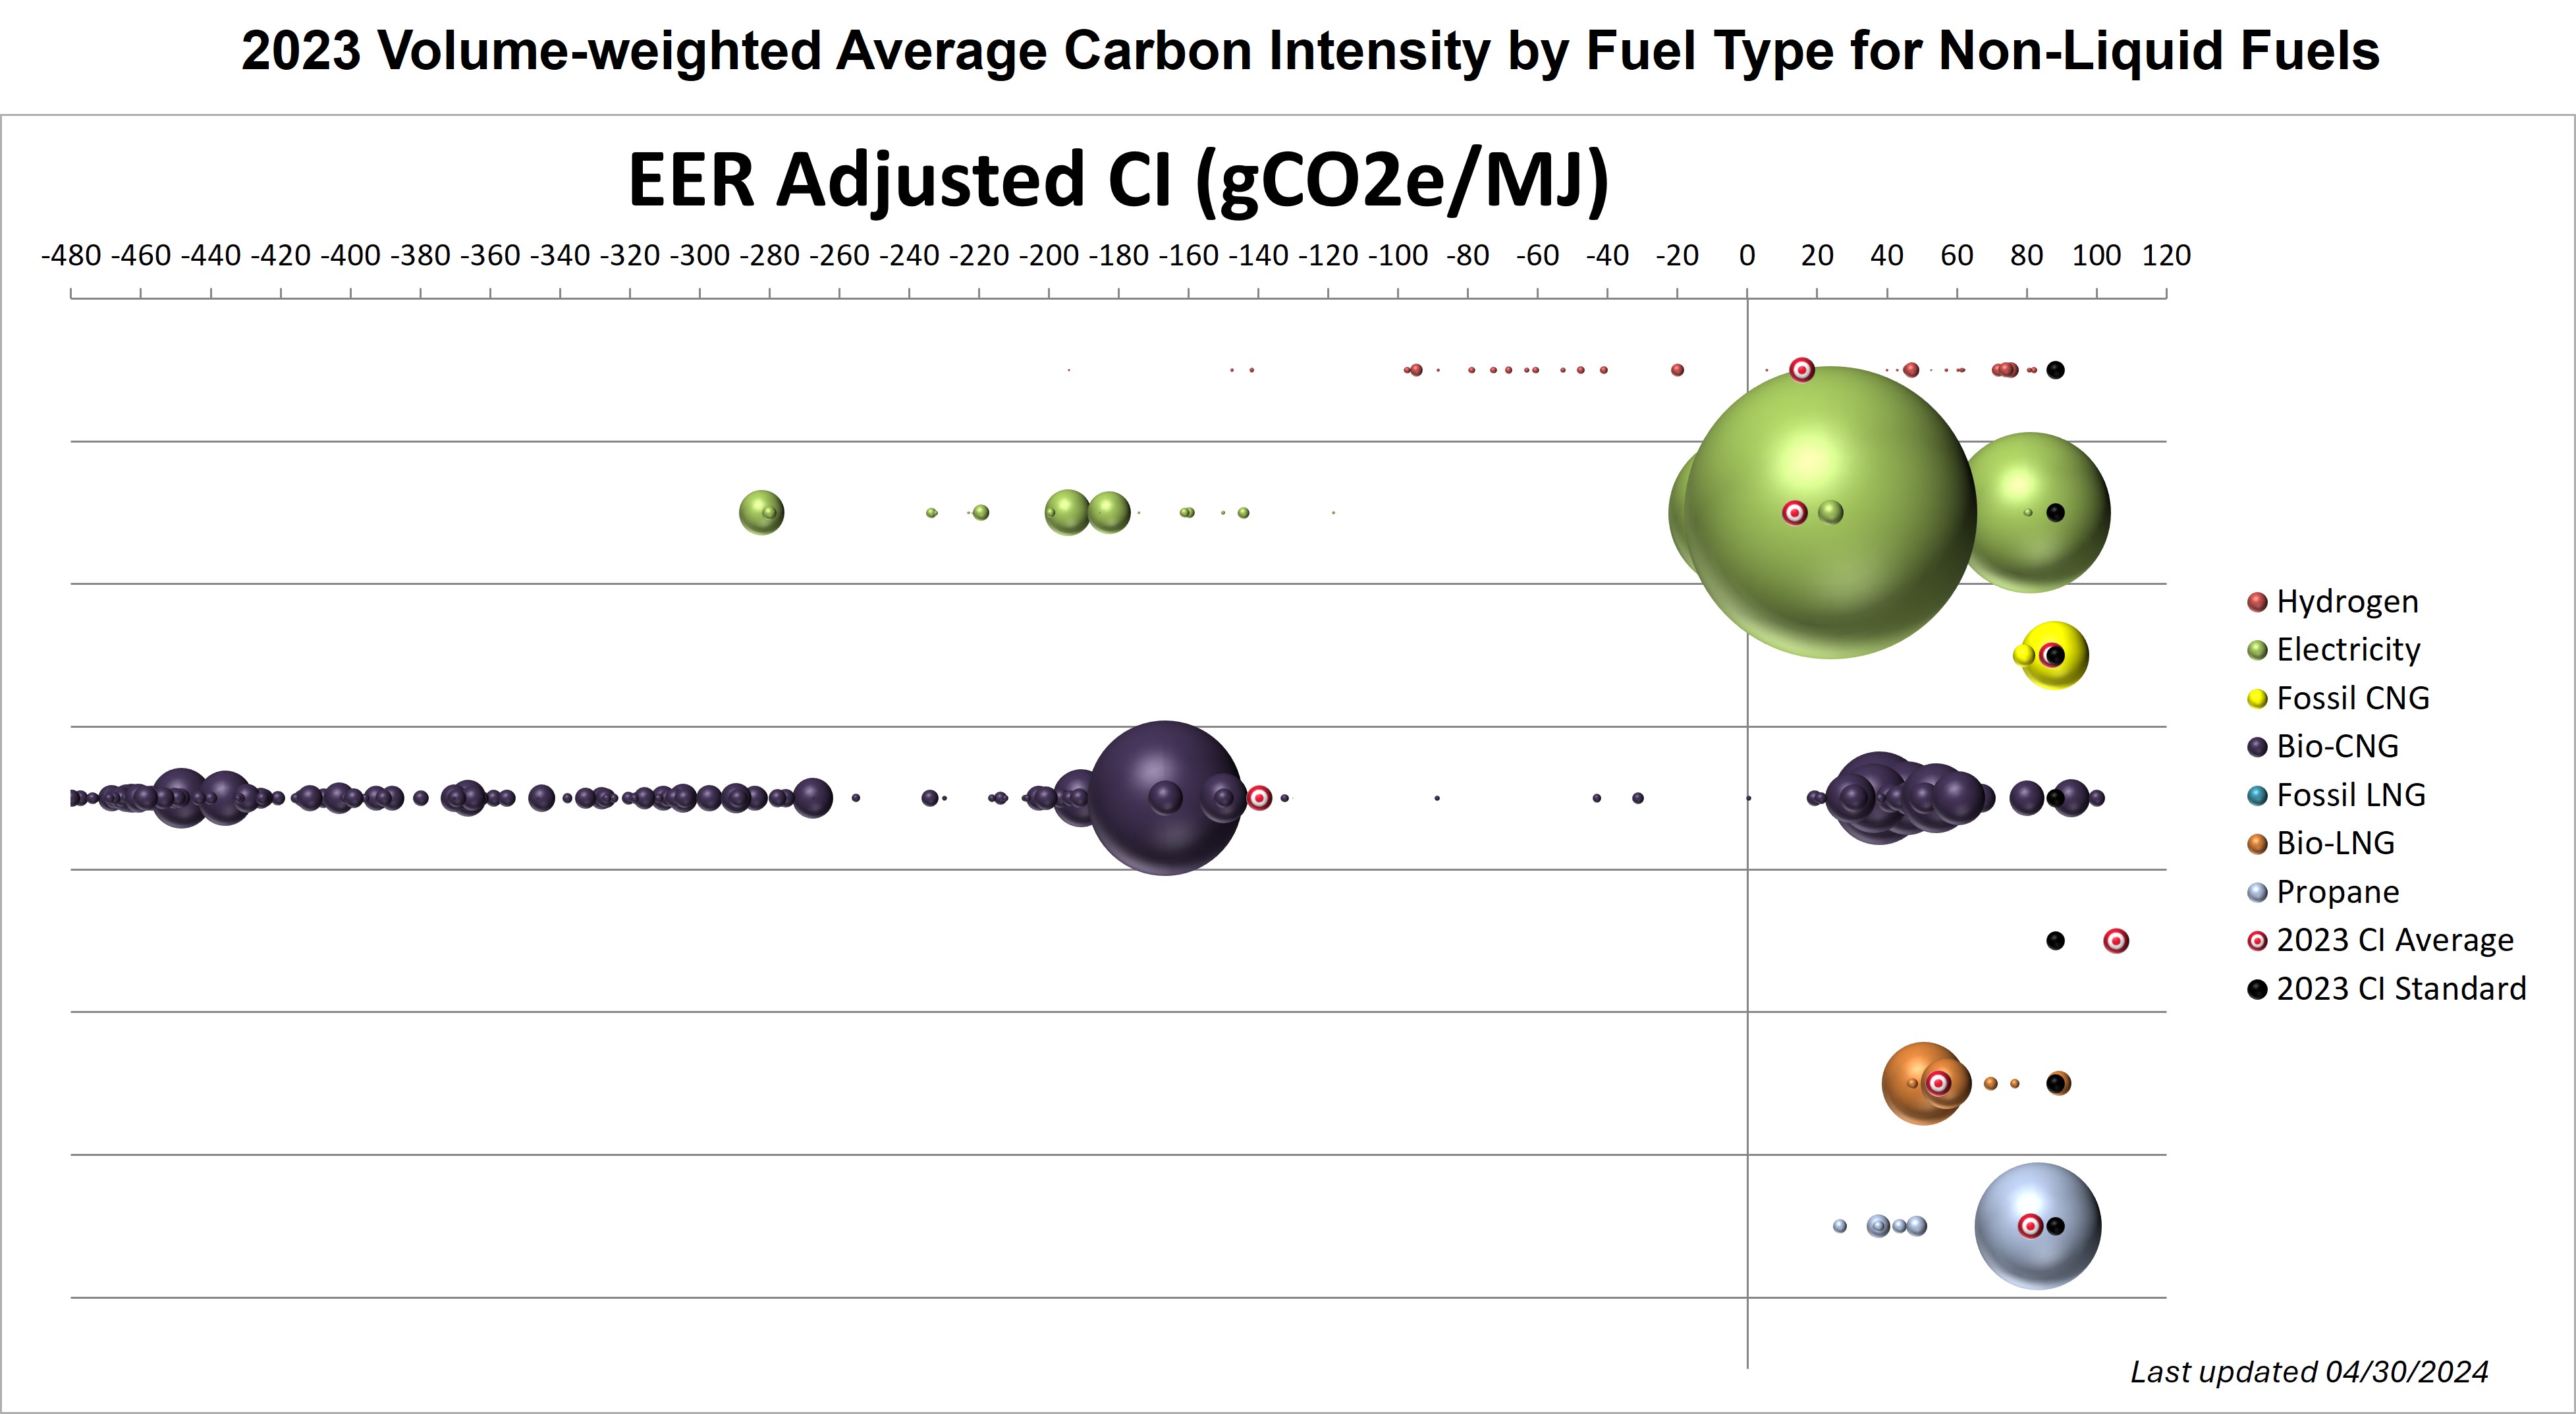 2023 Volume Weighted Average Carbon Intensity by Fuel Type for Non-Liquid Fuels